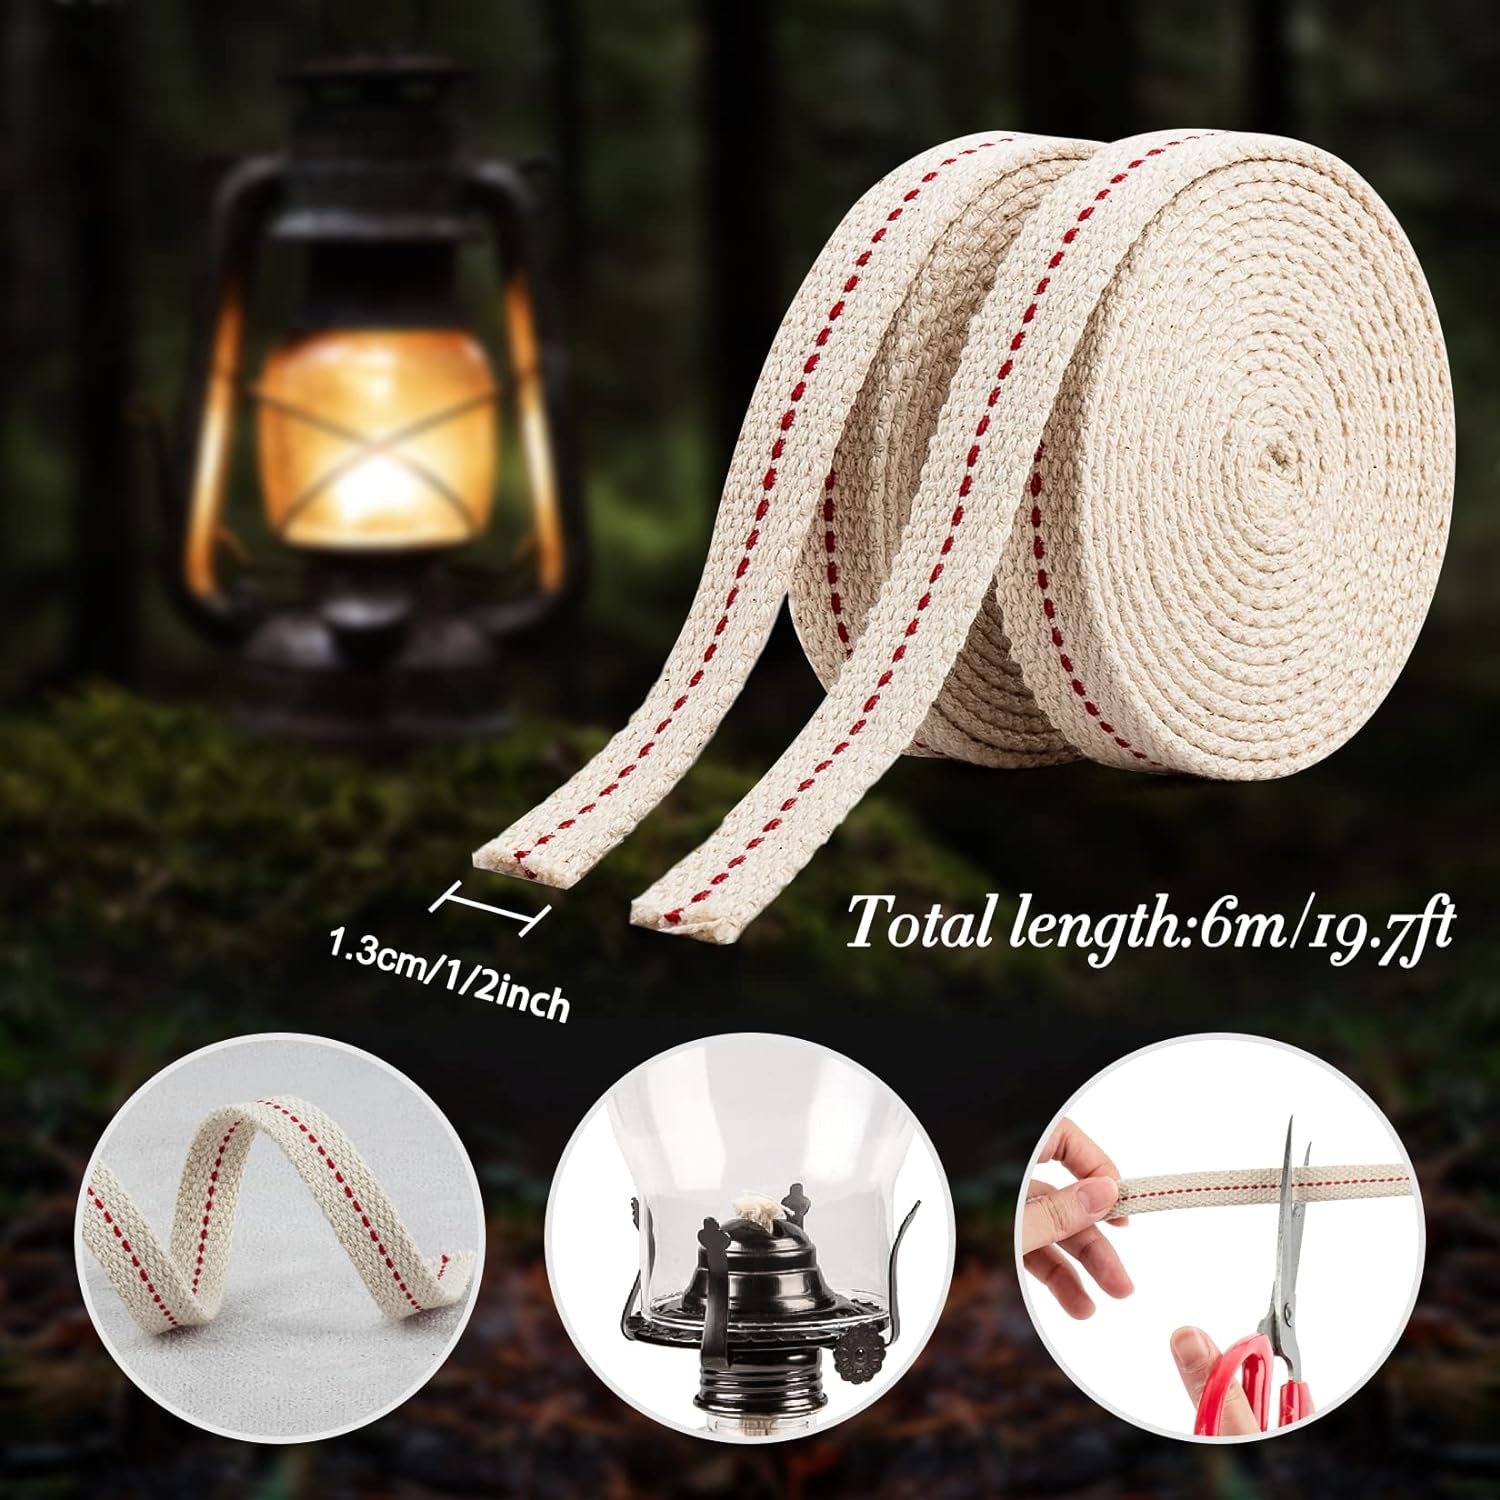 Lamp Wick Lantern Wick - Lantern Wicks 3 Rolls 1/2 Inch Flat Cotton Oil Lamp Wick with Genuine Red Stitch Replacement Oil Lanterns Wick for Paraffin Oil Kerosene Based Lanterns and Candle Burners